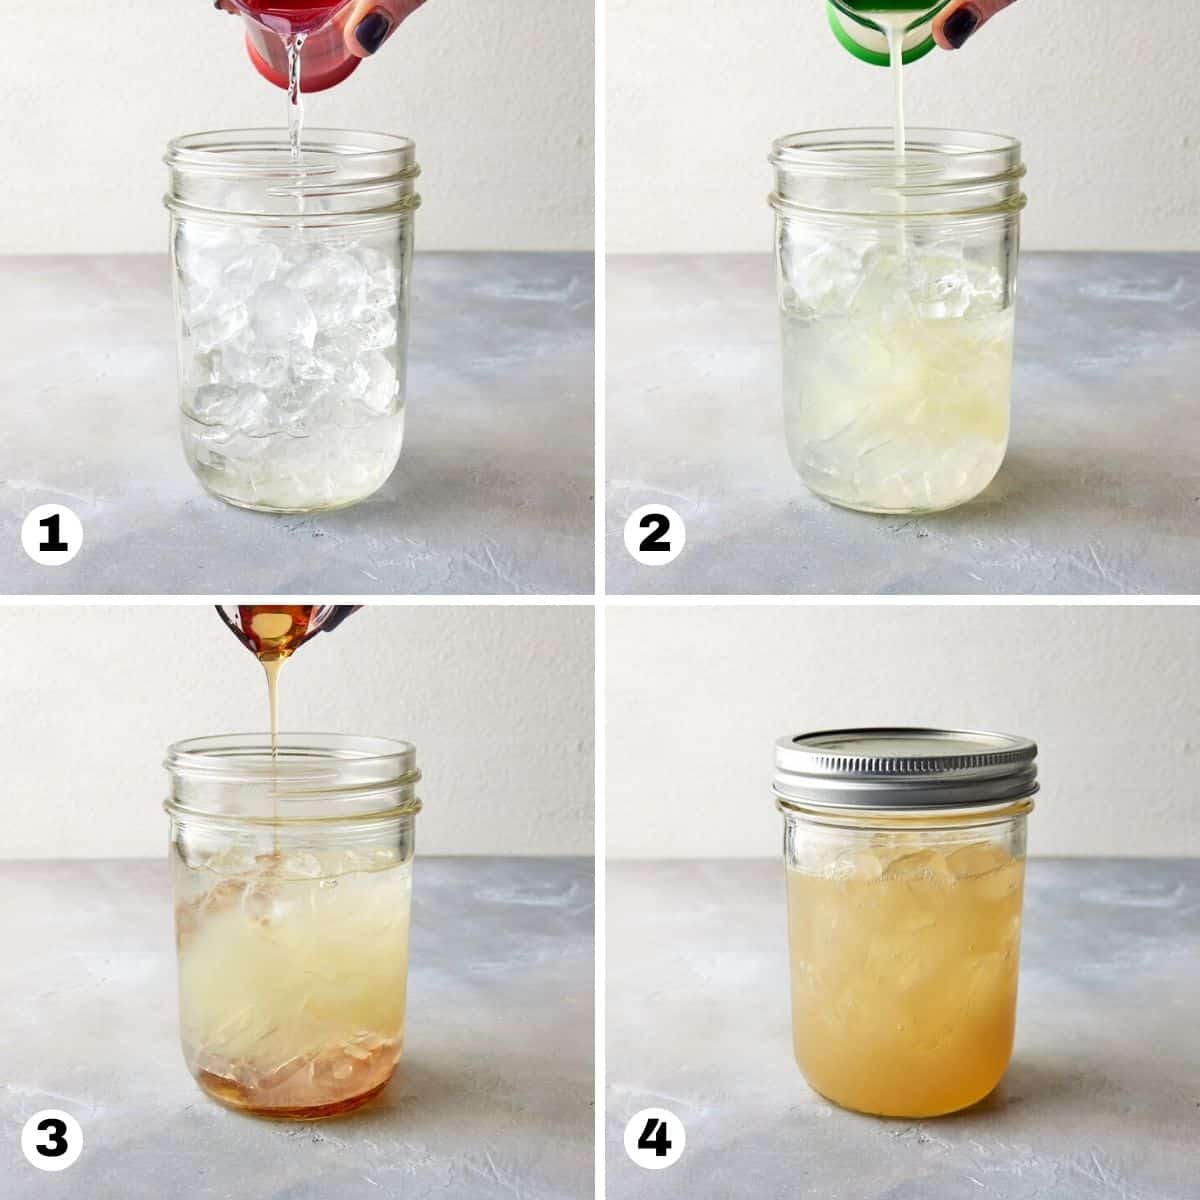 Steps to make a key lime margarita, pouring liquors and juices into shaker.